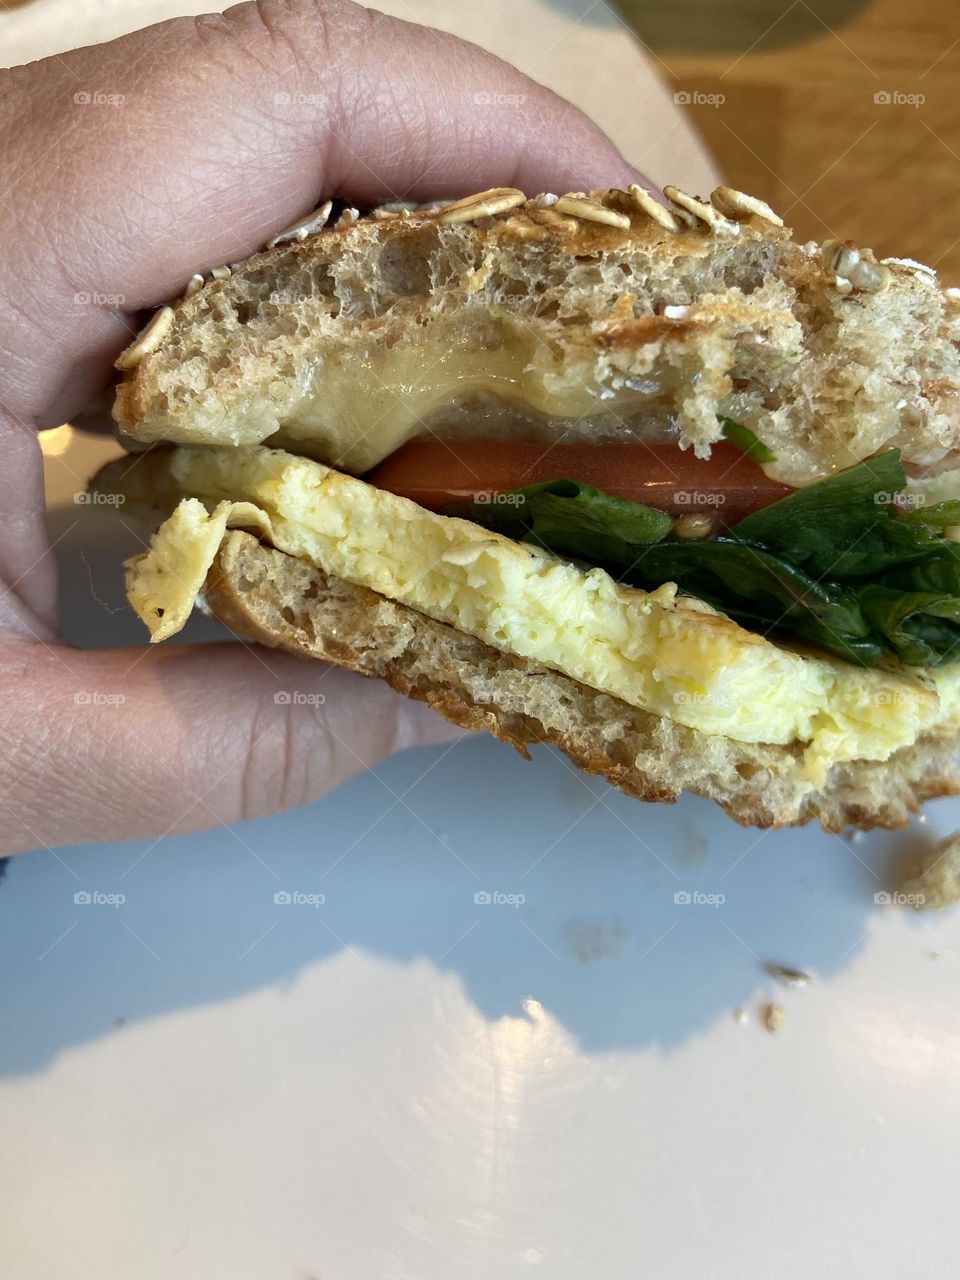 A scrambled egg and cheese with spinach and tomato on a sprouted grain bagel flat that I enjoyed at a local Panera  Bread. I love Panera because I can customize my breakfast sandwich to add some vegetables to my morning meal. 